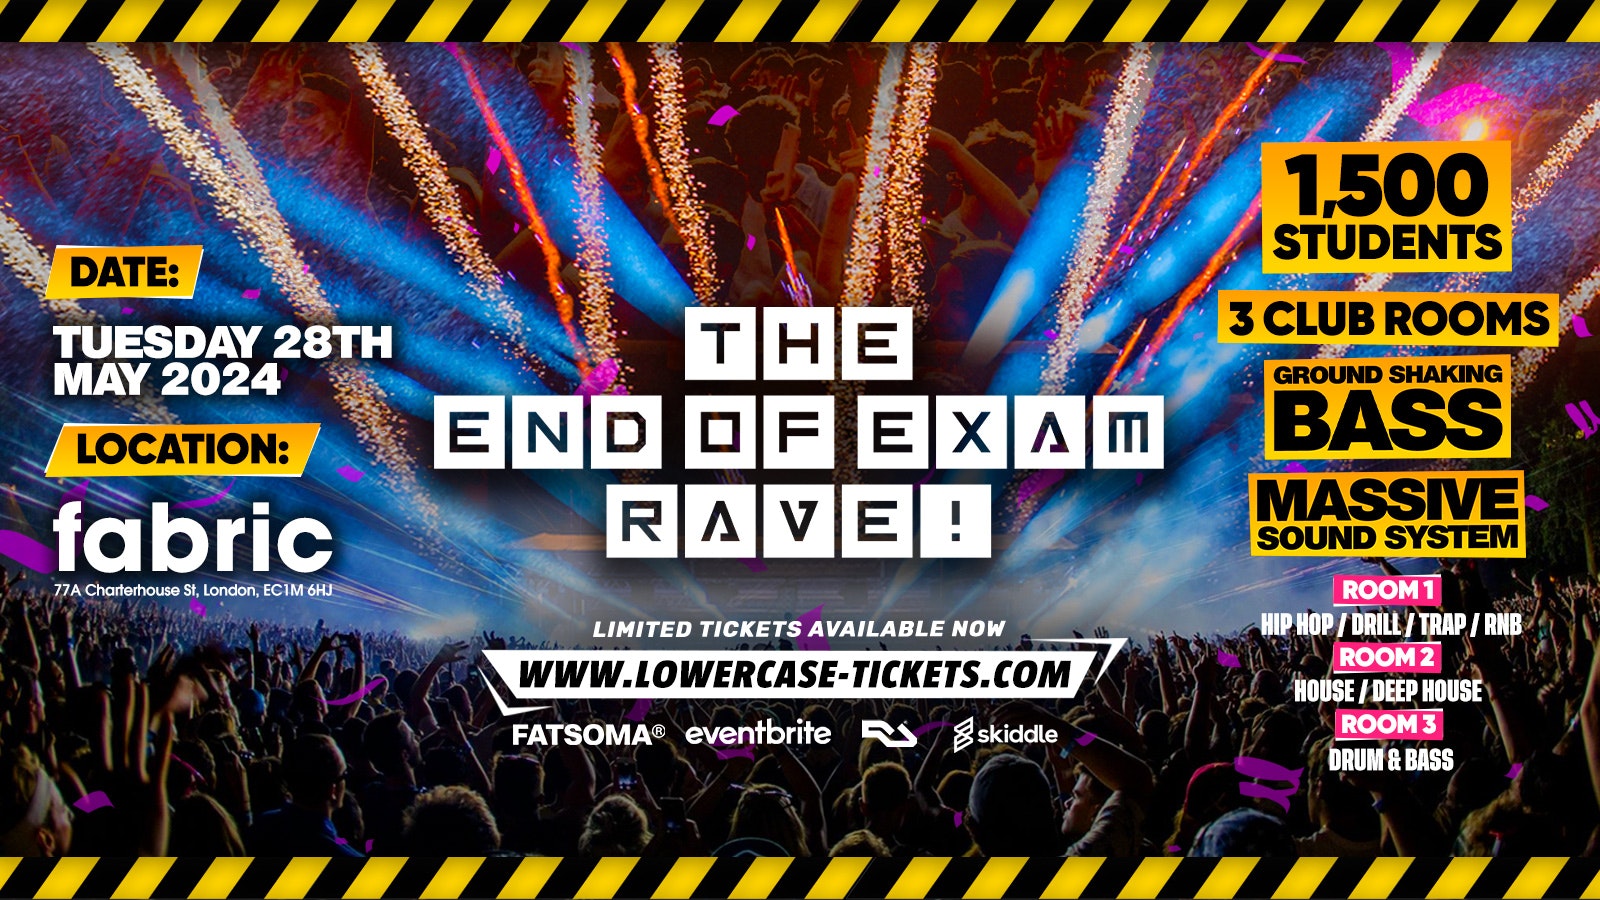 The End of Exams Rave @ FABRIC! – LAST 100 TICKETS ⚠️